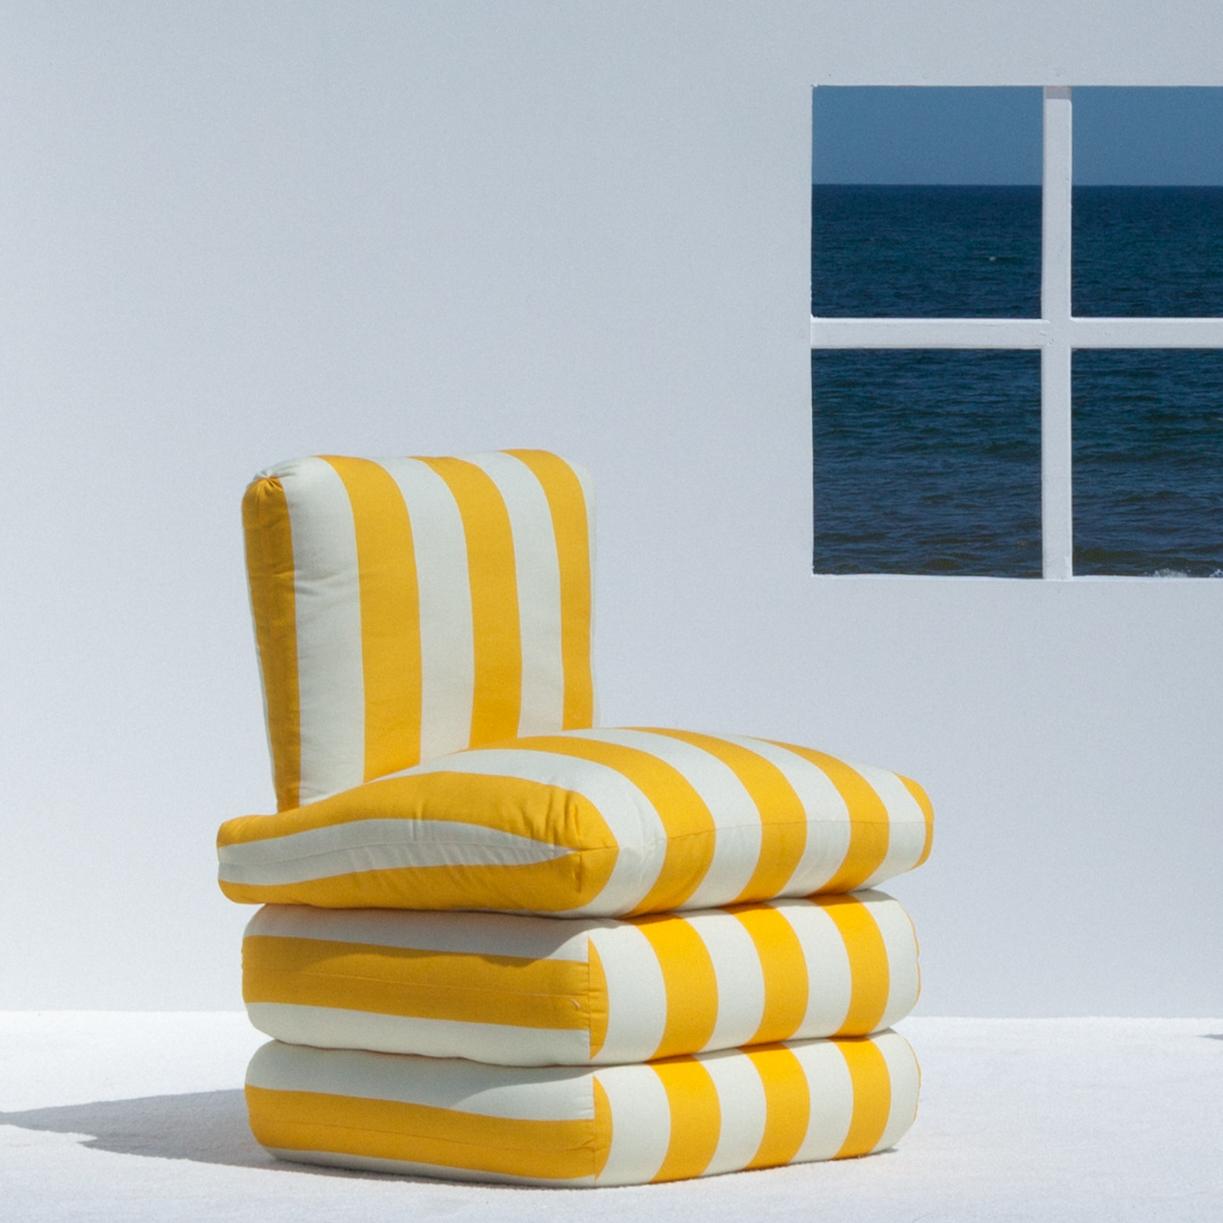 Inspired by the relaxed glamour of the 1960’s Italian Riviera, our new Pillow Chair physically embodies the longing for lazy summer days with a comfortable, fully upholstered chair in colorful and classic stripes. 

The upholstered shape brings to